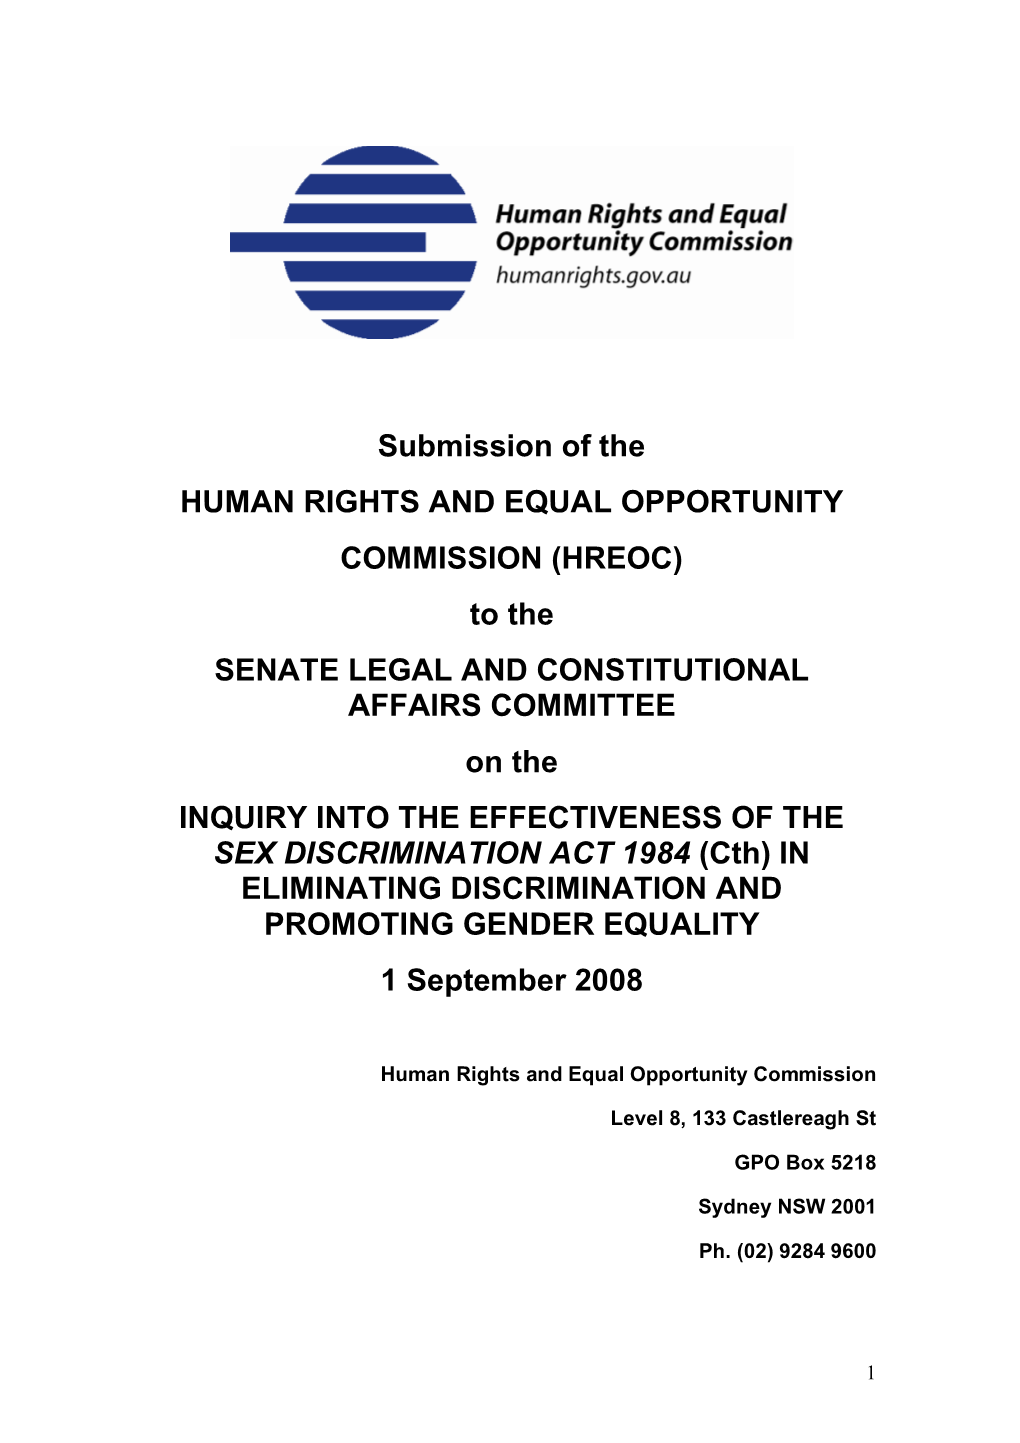 Submission of the HUMAN RIGHTS and EQUAL OPPORTUNITY